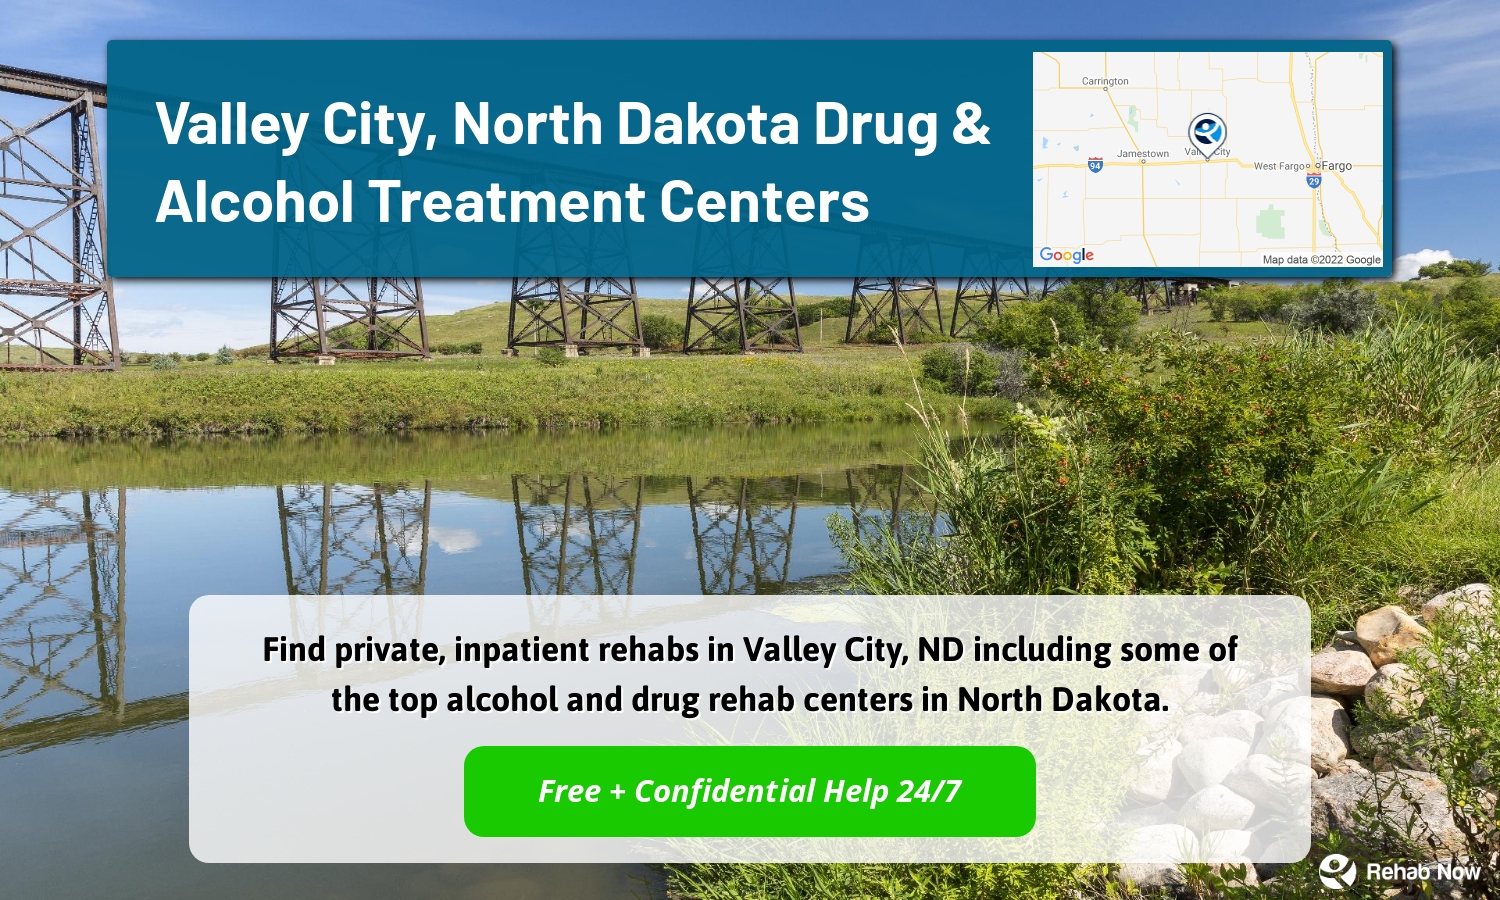 Find private, inpatient rehabs in Valley City, ND including some of the top alcohol and drug rehab centers in North Dakota.